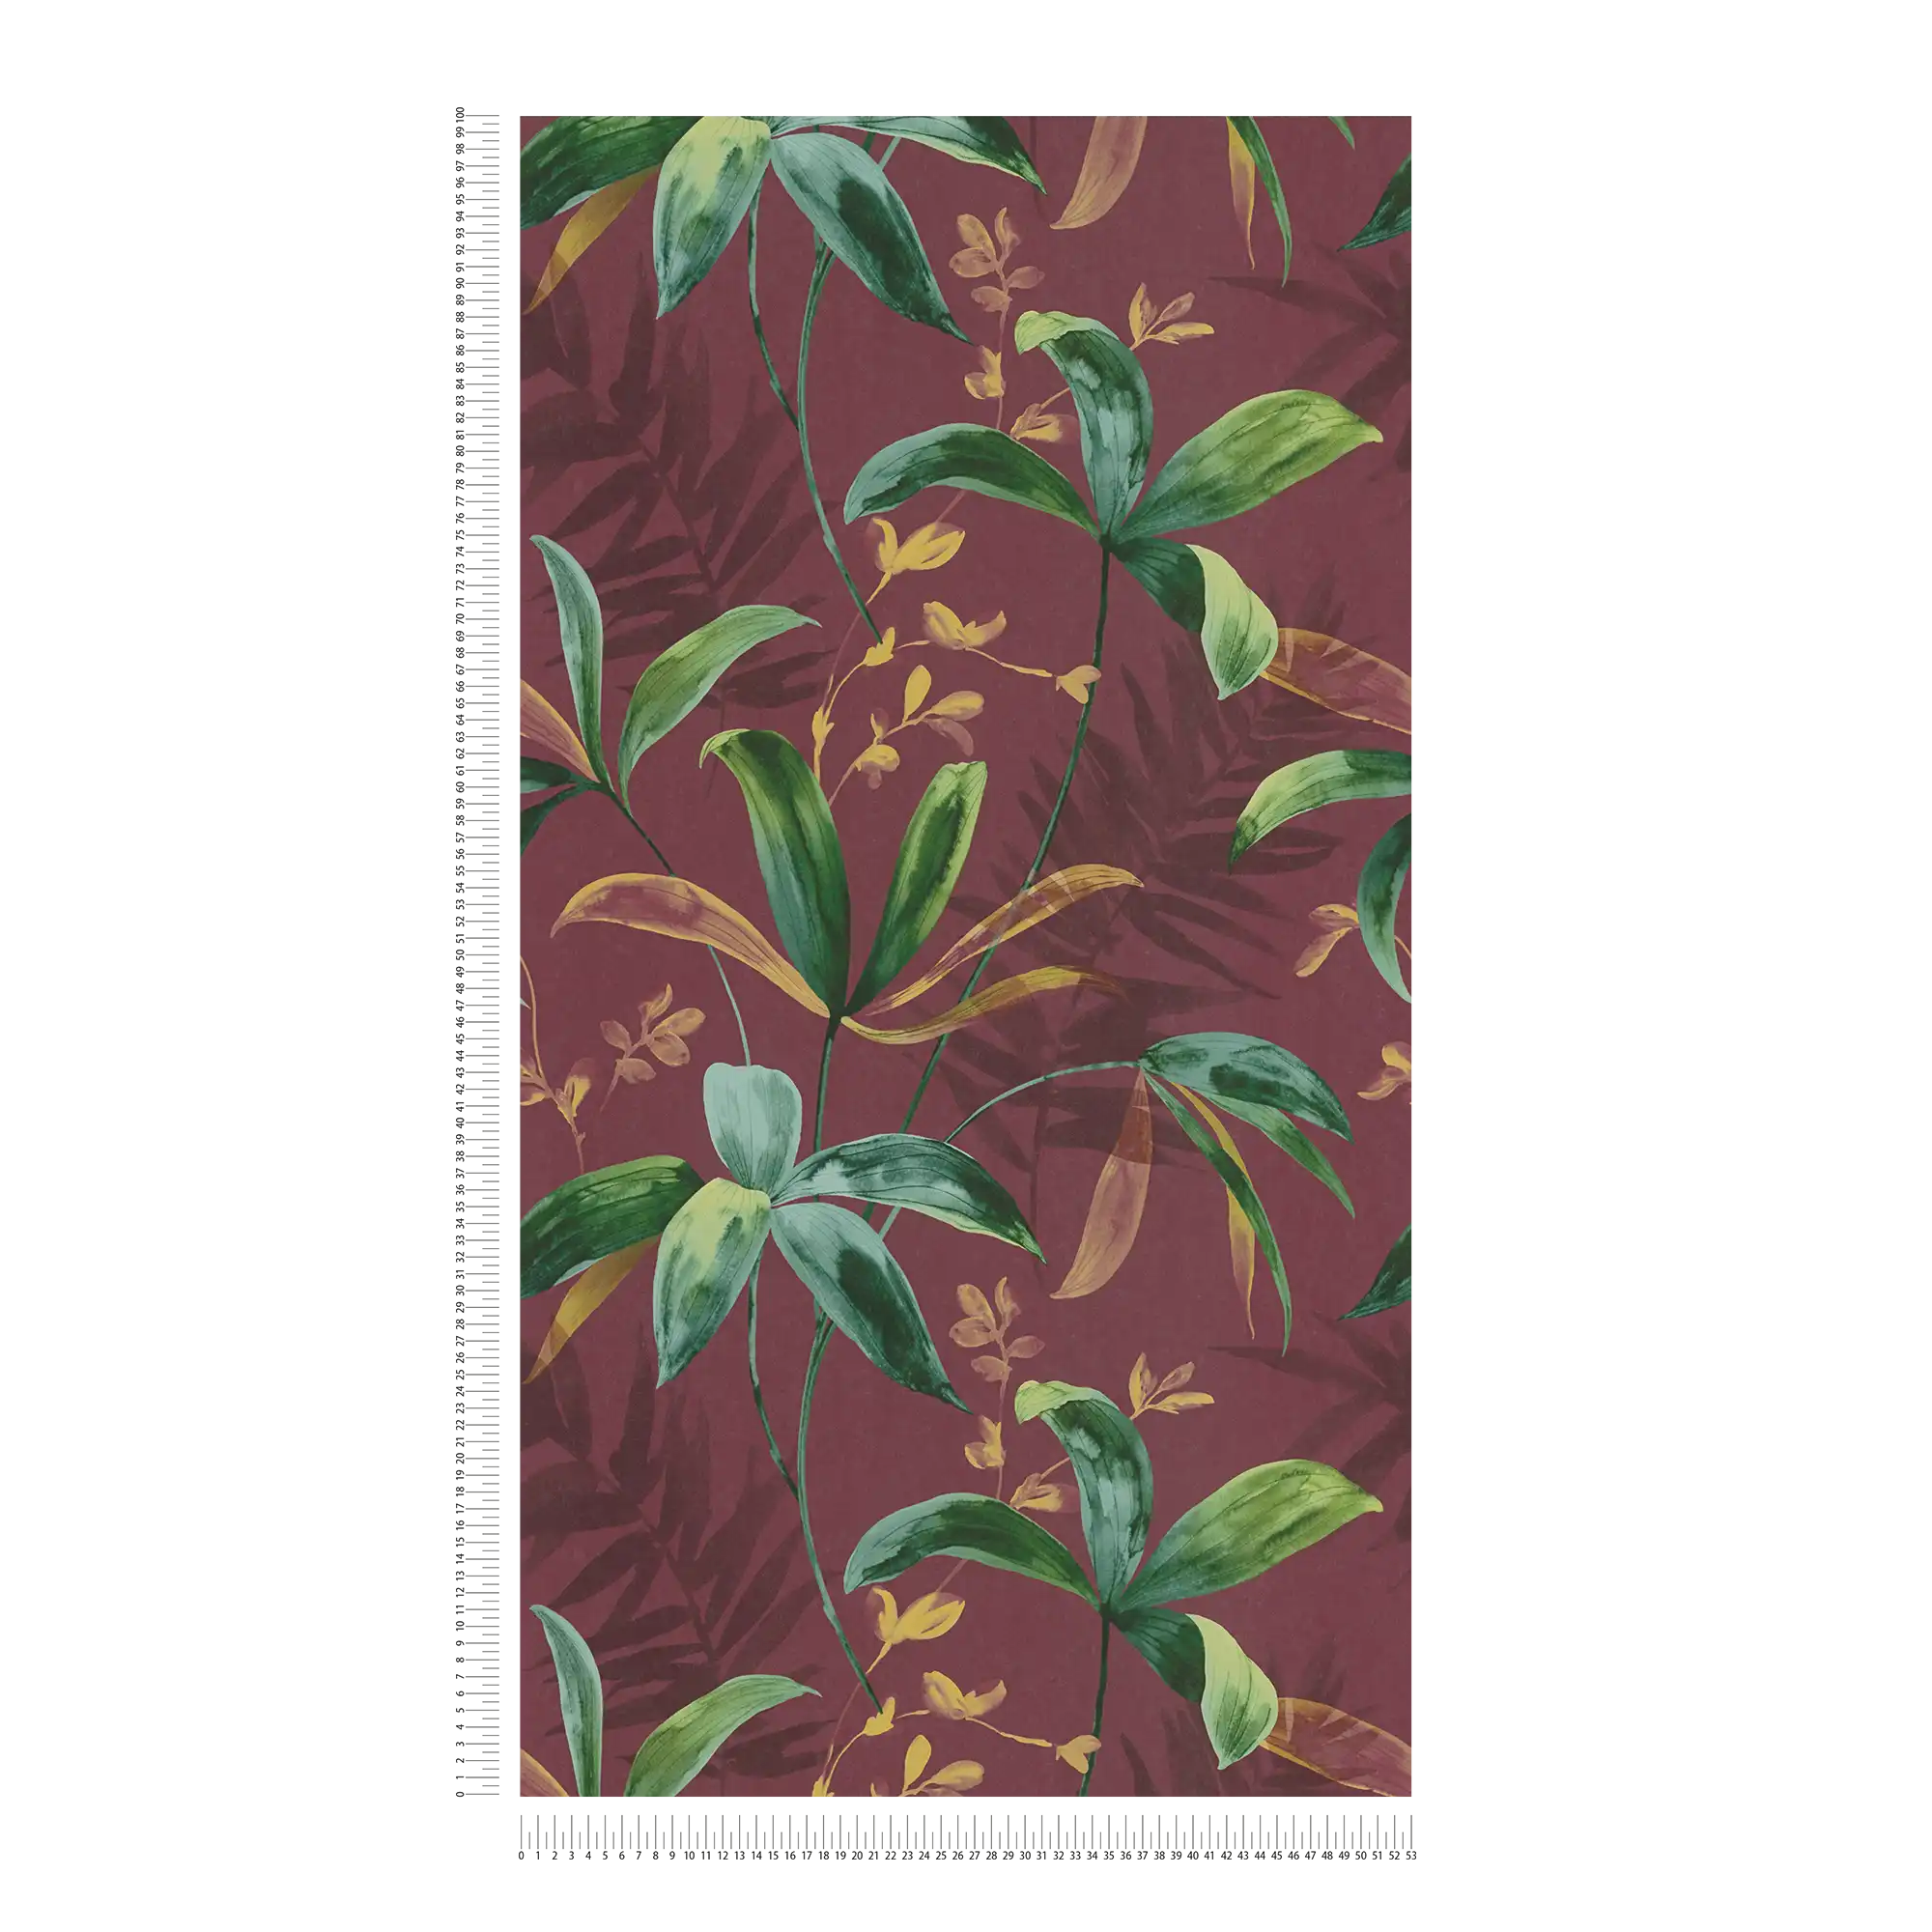             Dark red wallpaper with green leaves in watercolour style - red, green, yellow
        